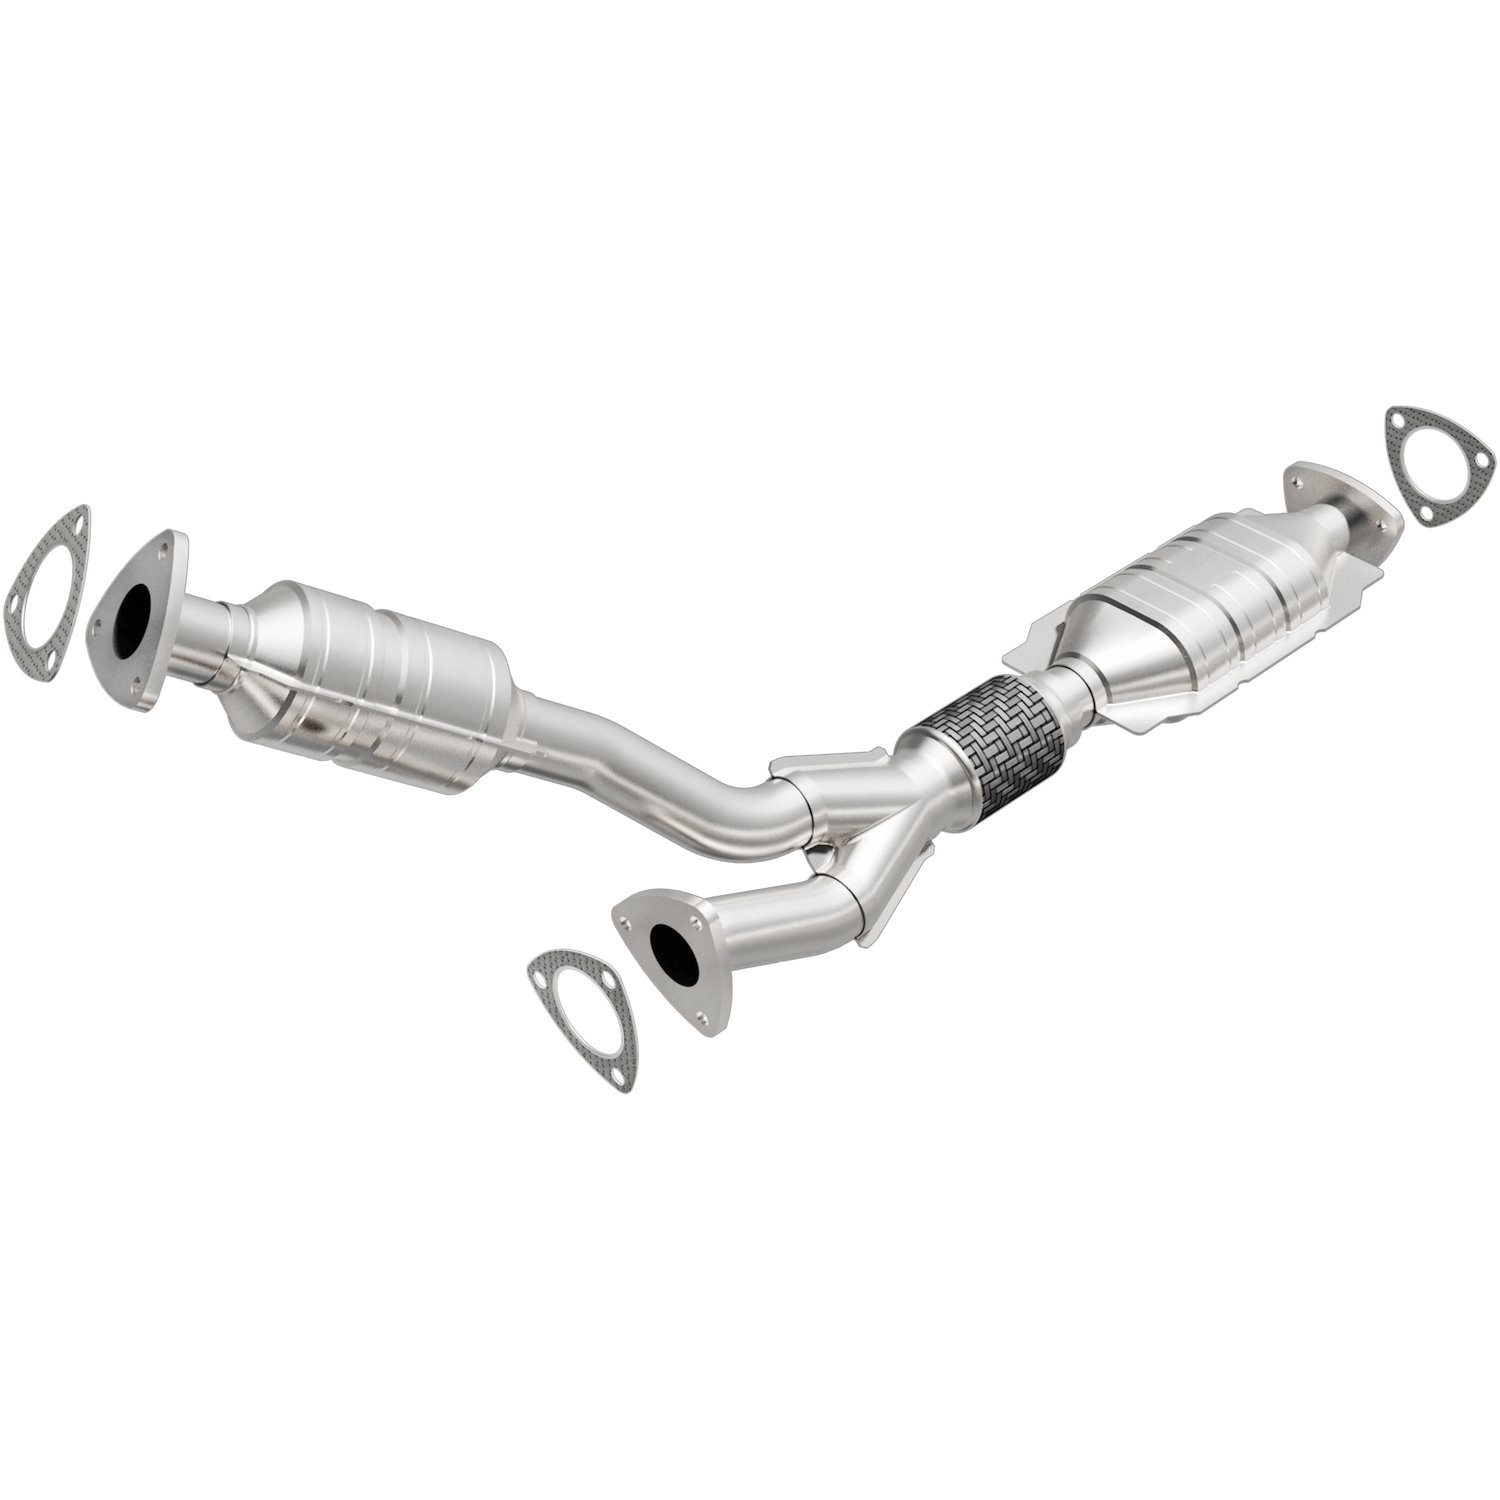 OEM Grade Federal / EPA Compliant Direct-Fit Catalytic Converter 49527